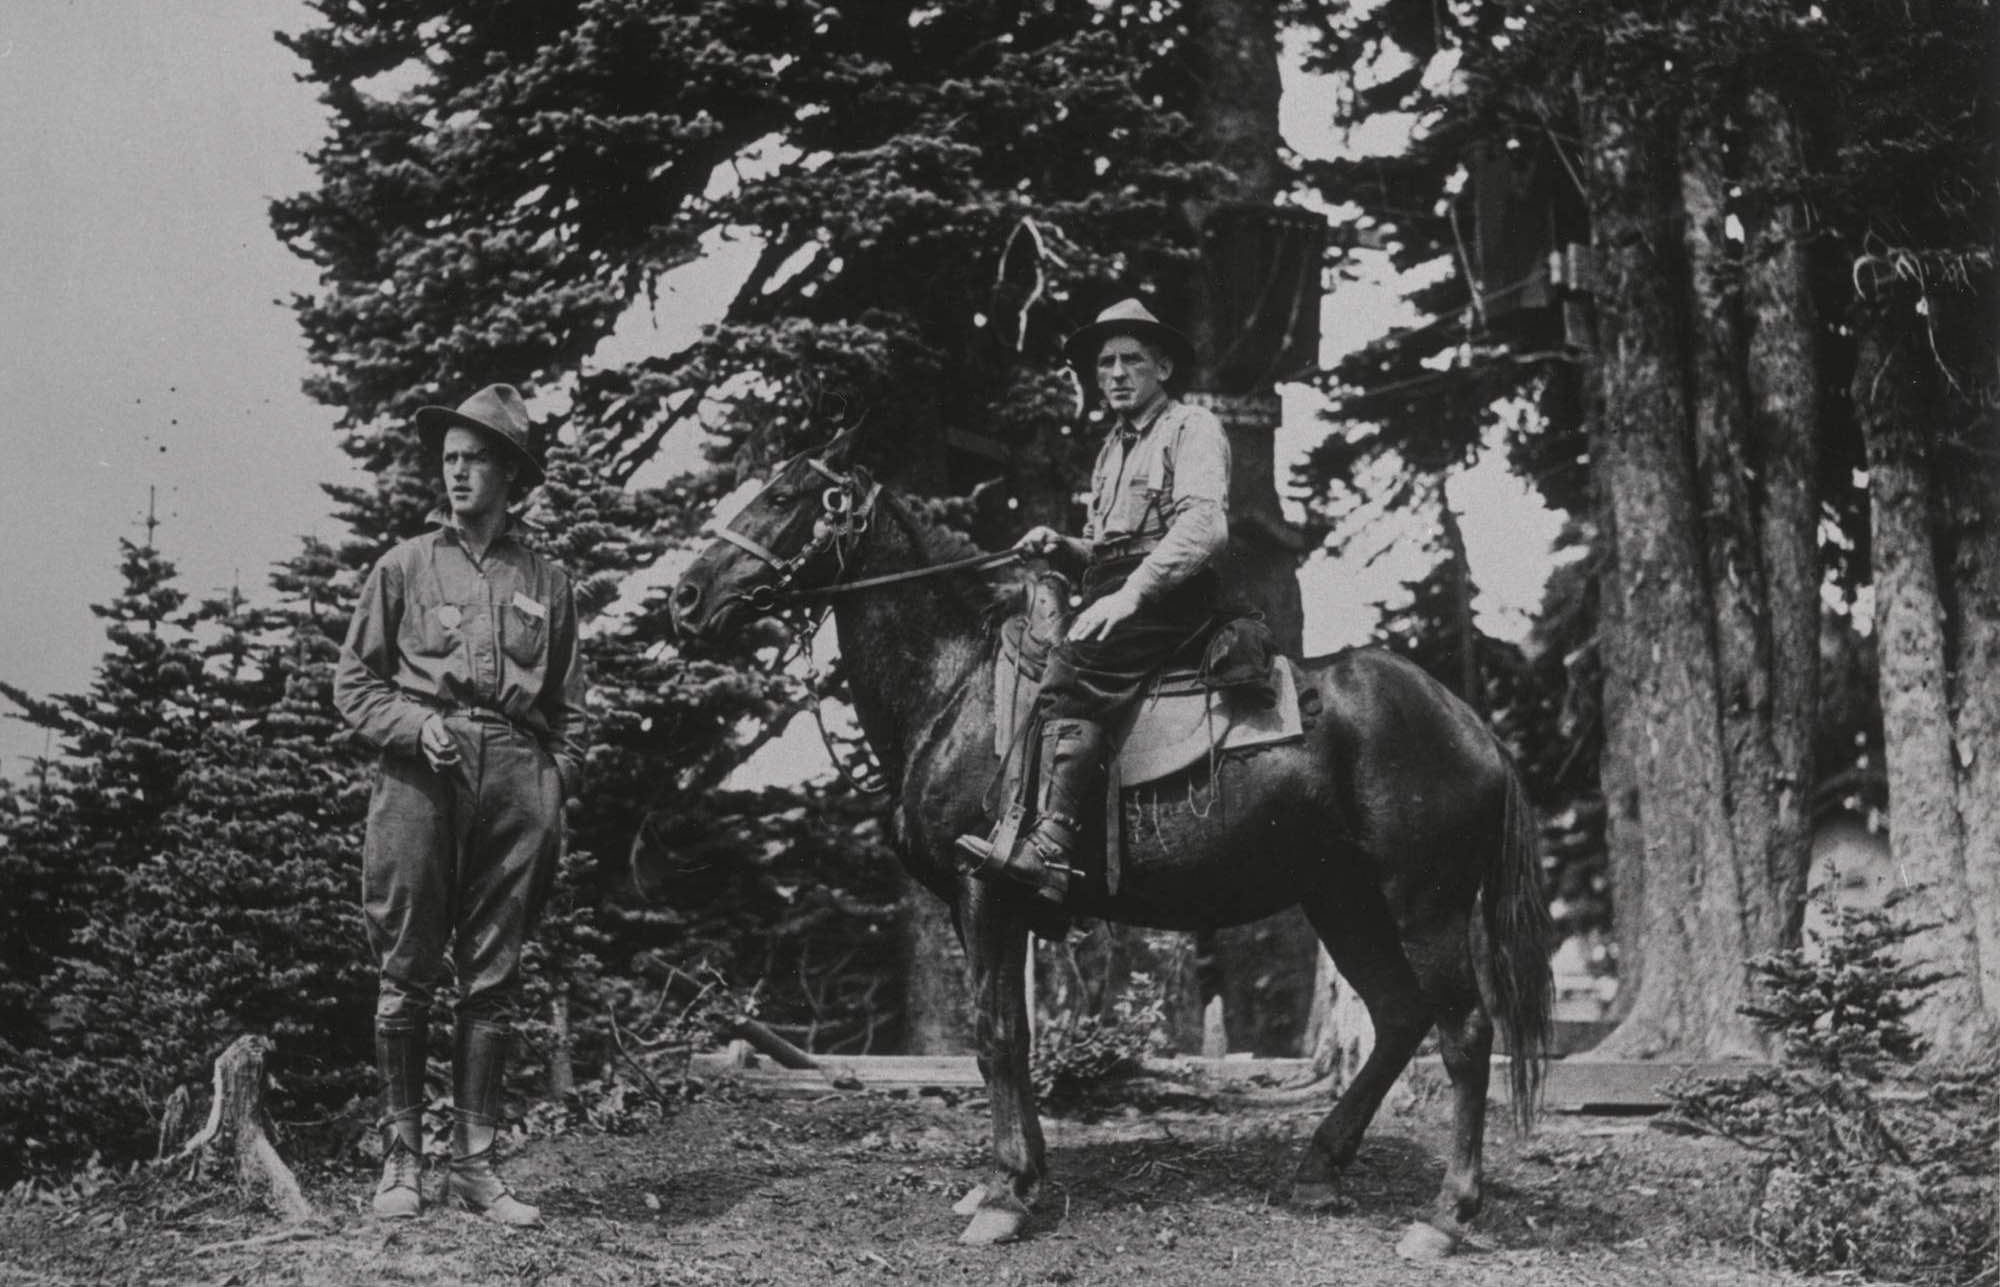 A man stands by another on horseback. Both wear breeches, boots, shirts, and flat brim hats. One has a round badge on his shirt.